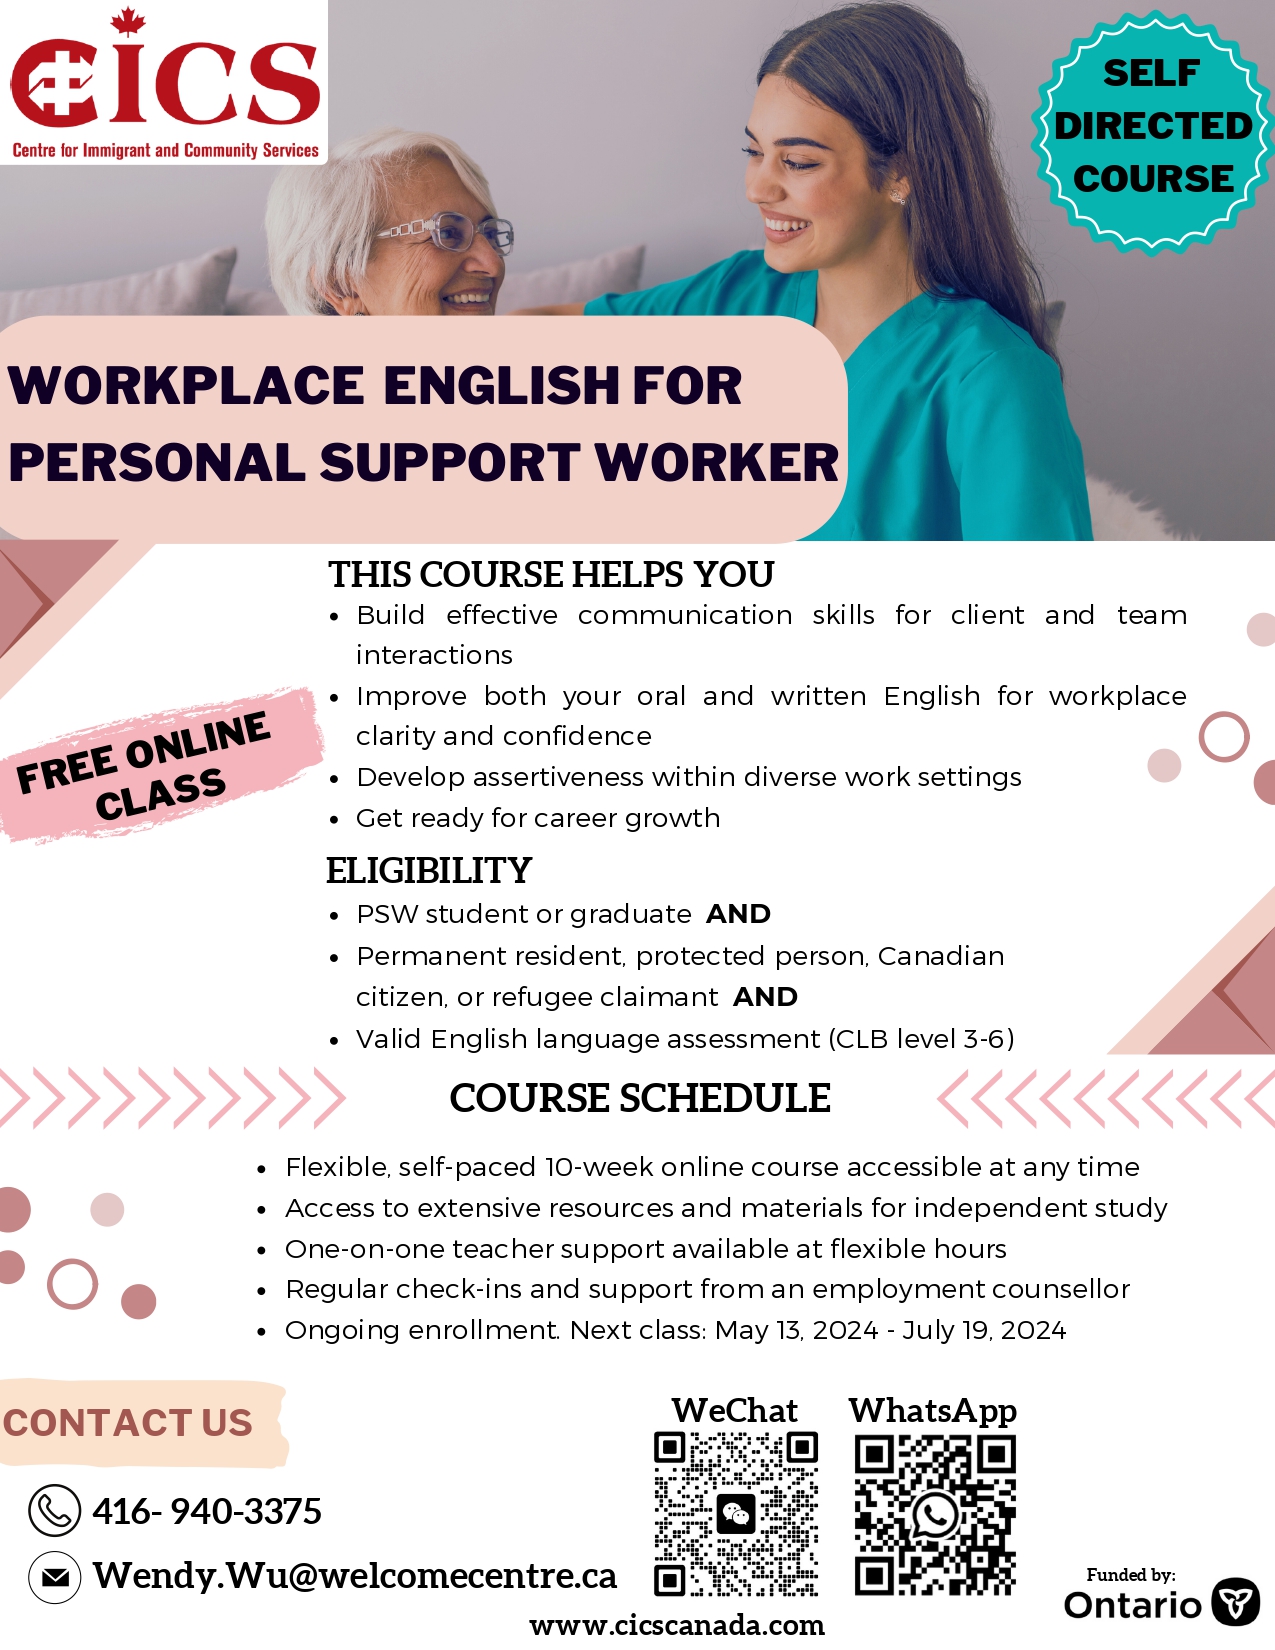 Workplace English for Personal Support Workers